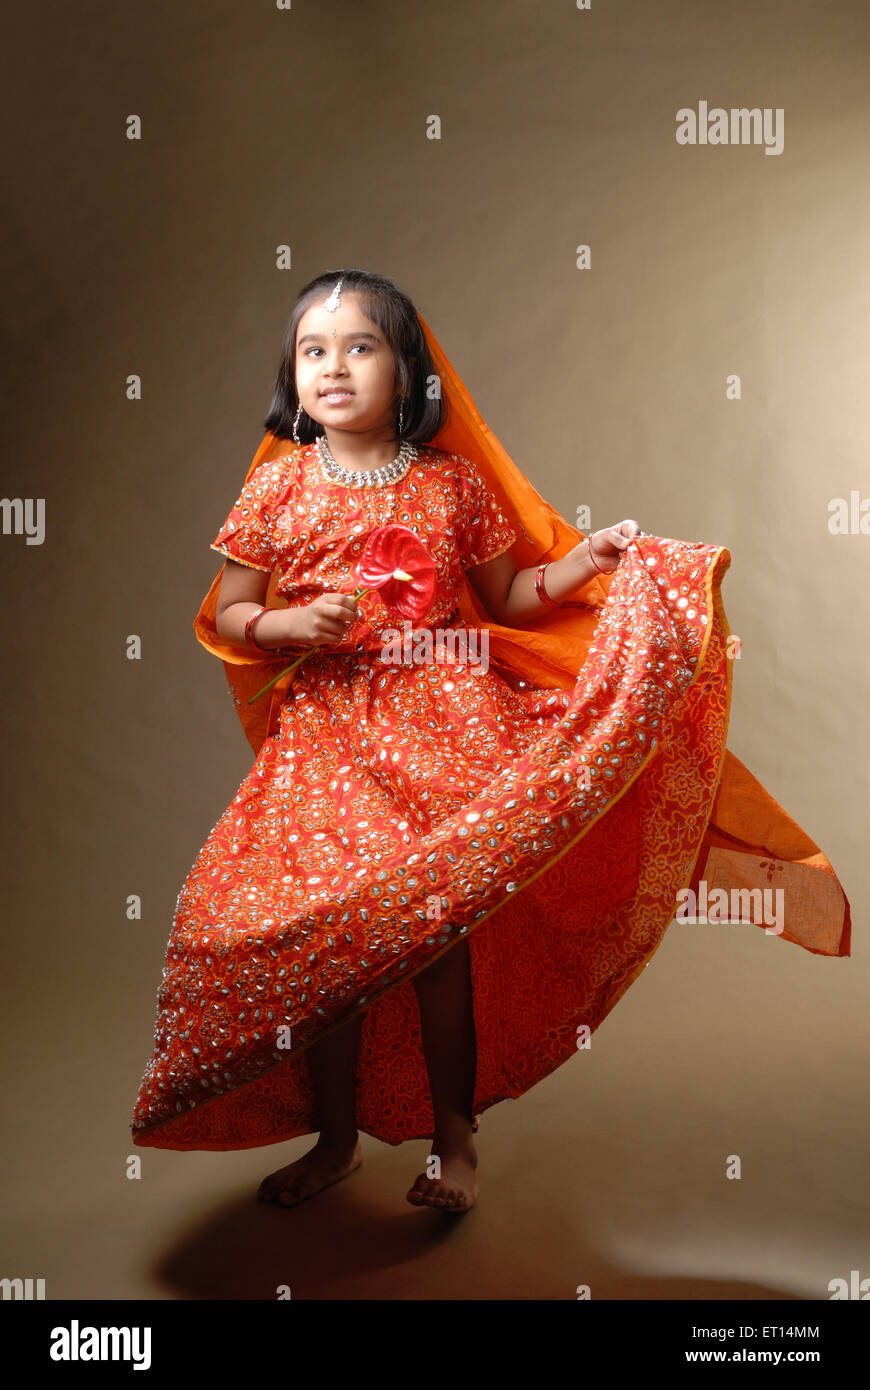 Young girl in ghagra choli holding anthurium flower MR#719D Stock Photo